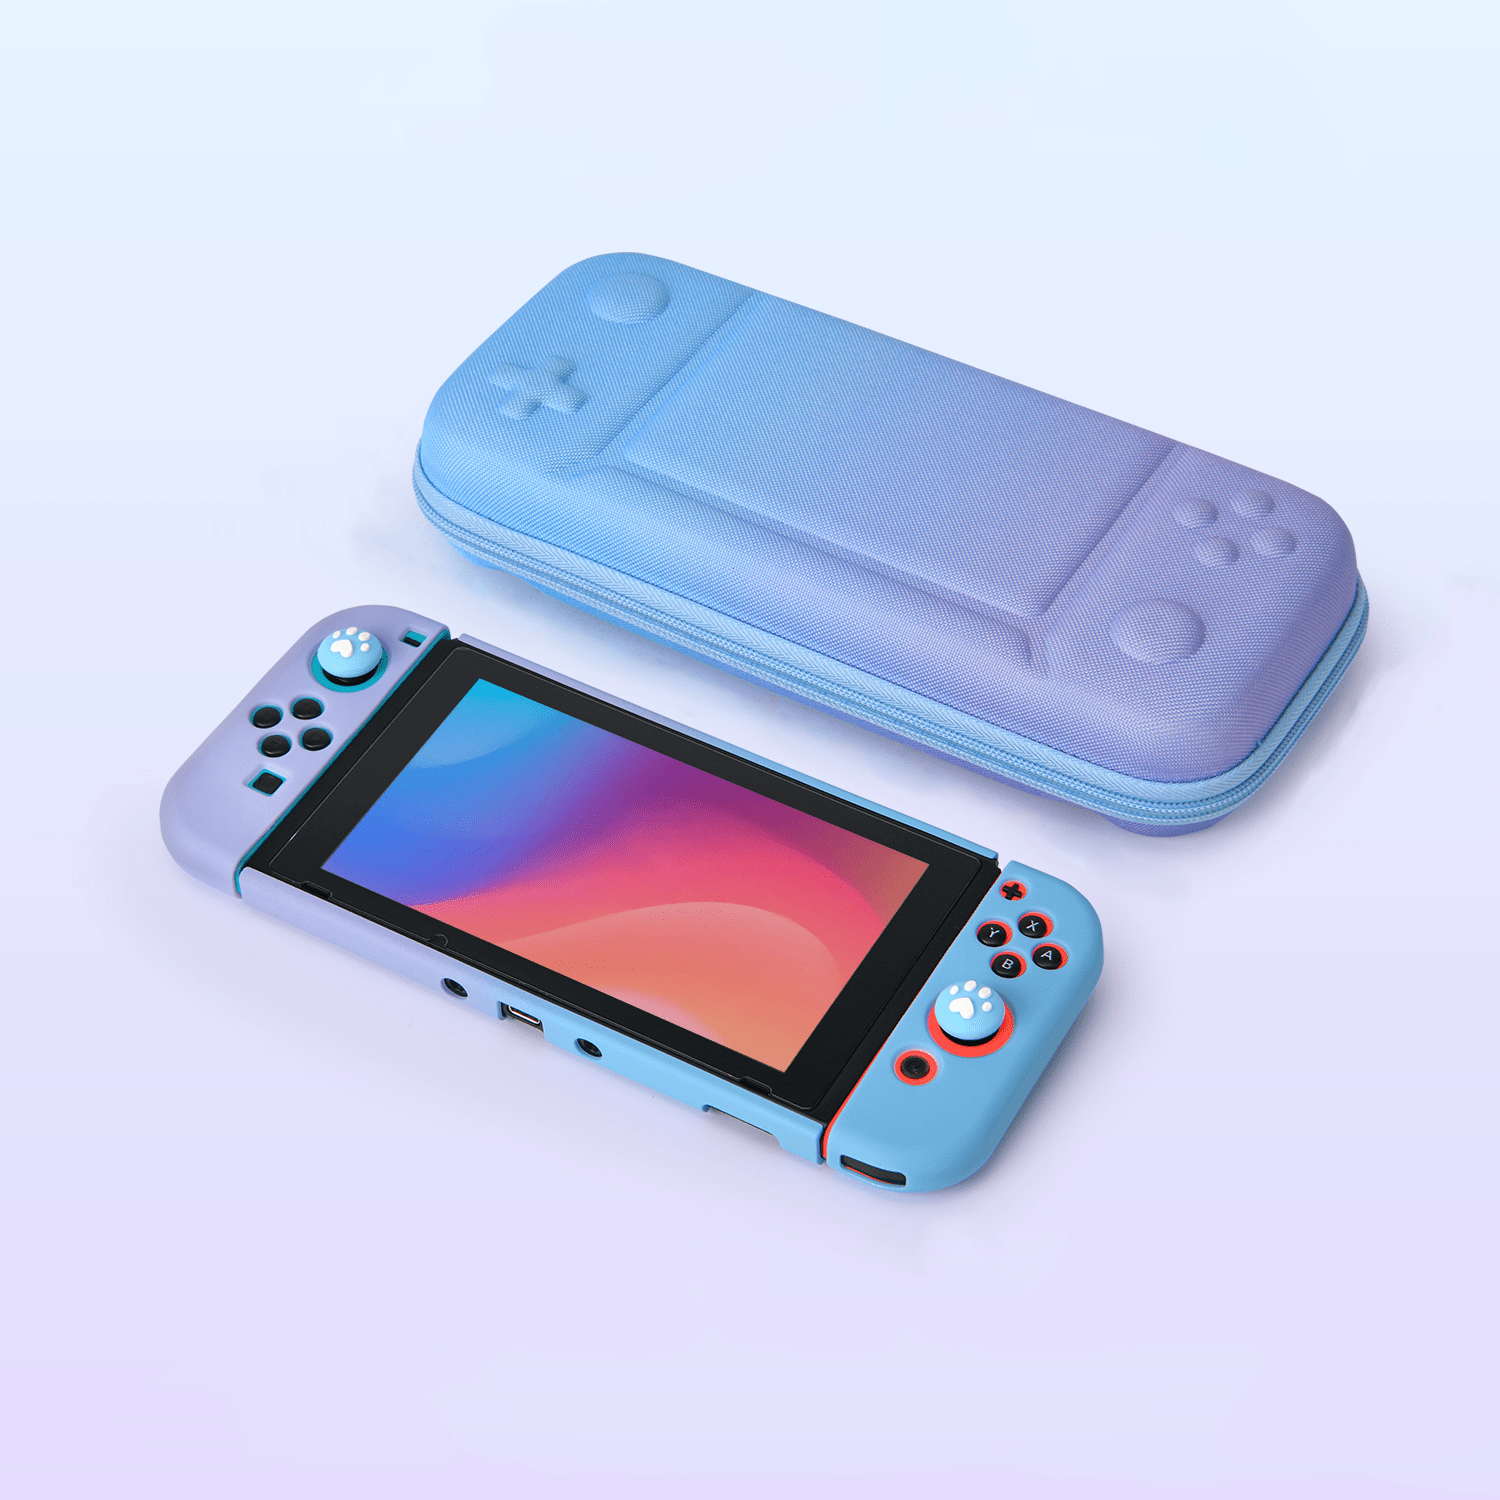 Younik Button Design Slim Travel Case for Switch, Switch Carrying Case, Joy-Con Design